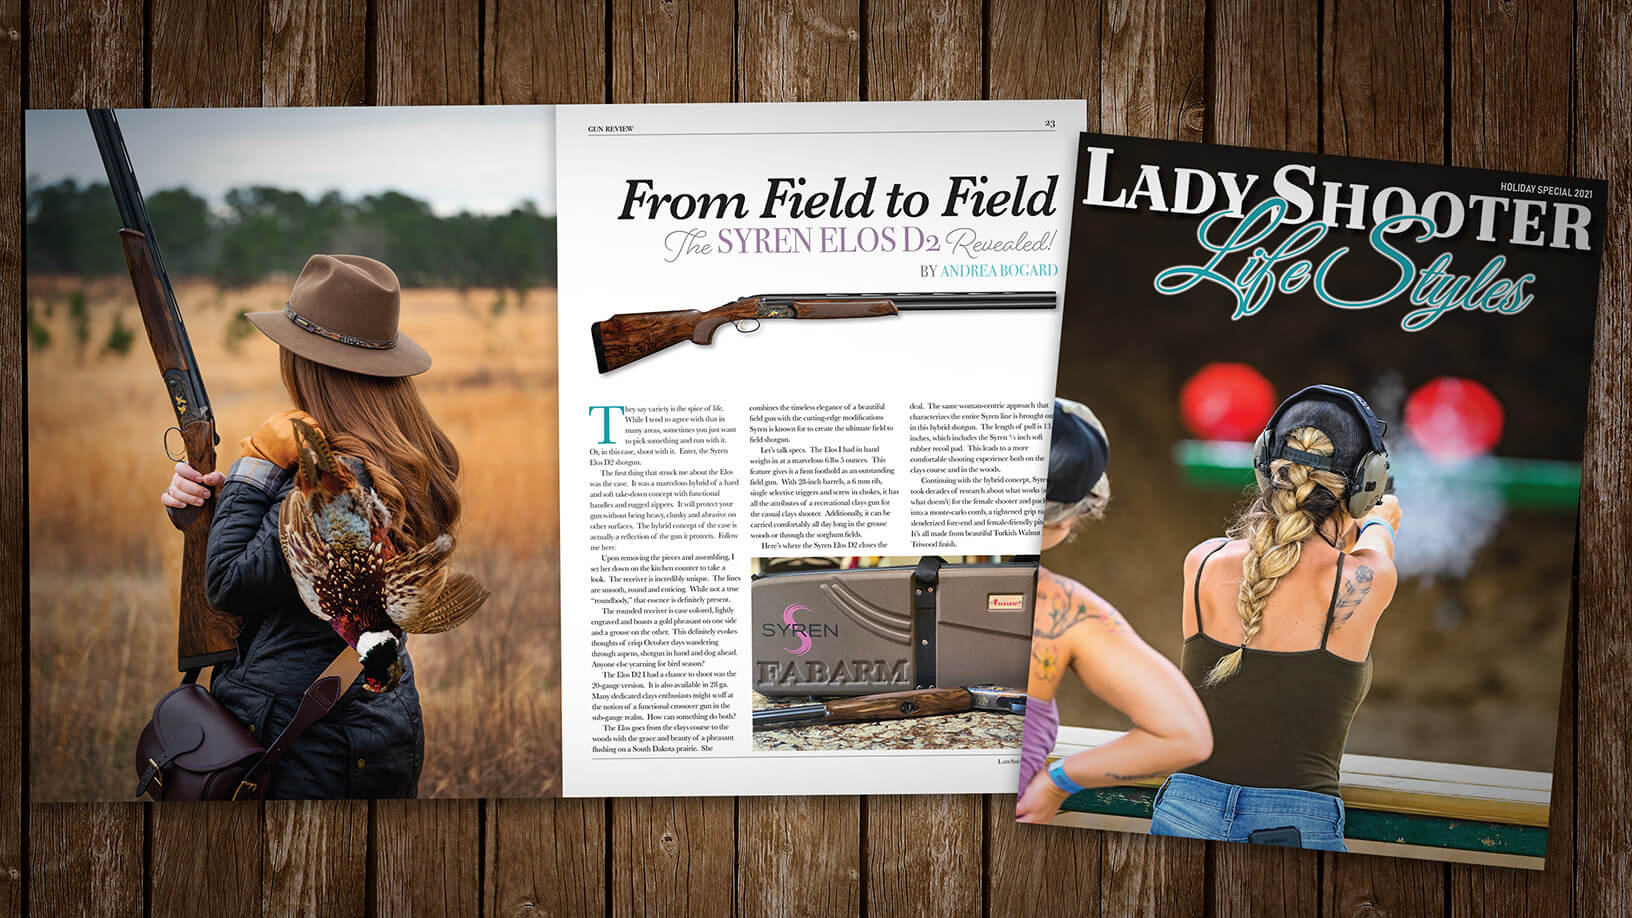 [Lady Shooter Lifestyles 12:21] From Field to Field: The Syren Elos D2 Revealed by Andrea Bogard